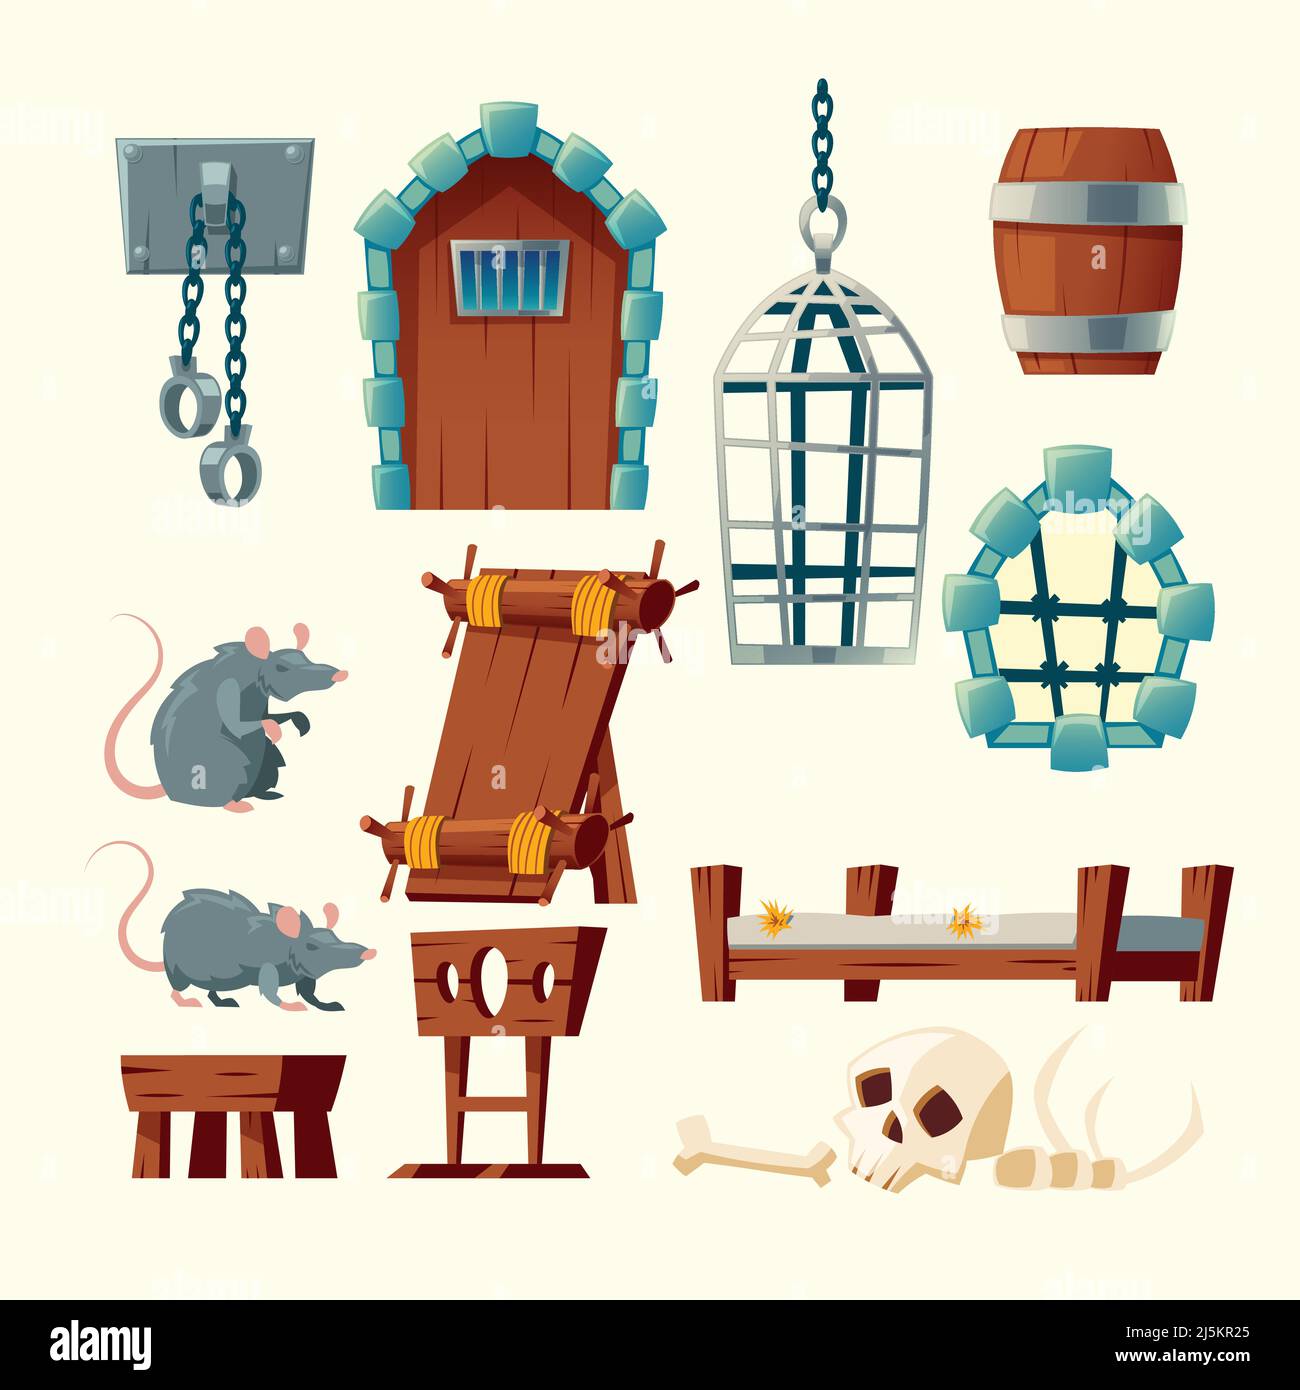 Vector cartoon set of medieval prison, torture objects - rack, shackles and metal hanging cage. Wooden bunks, barrel, pillory for punishment, window i Stock Vector